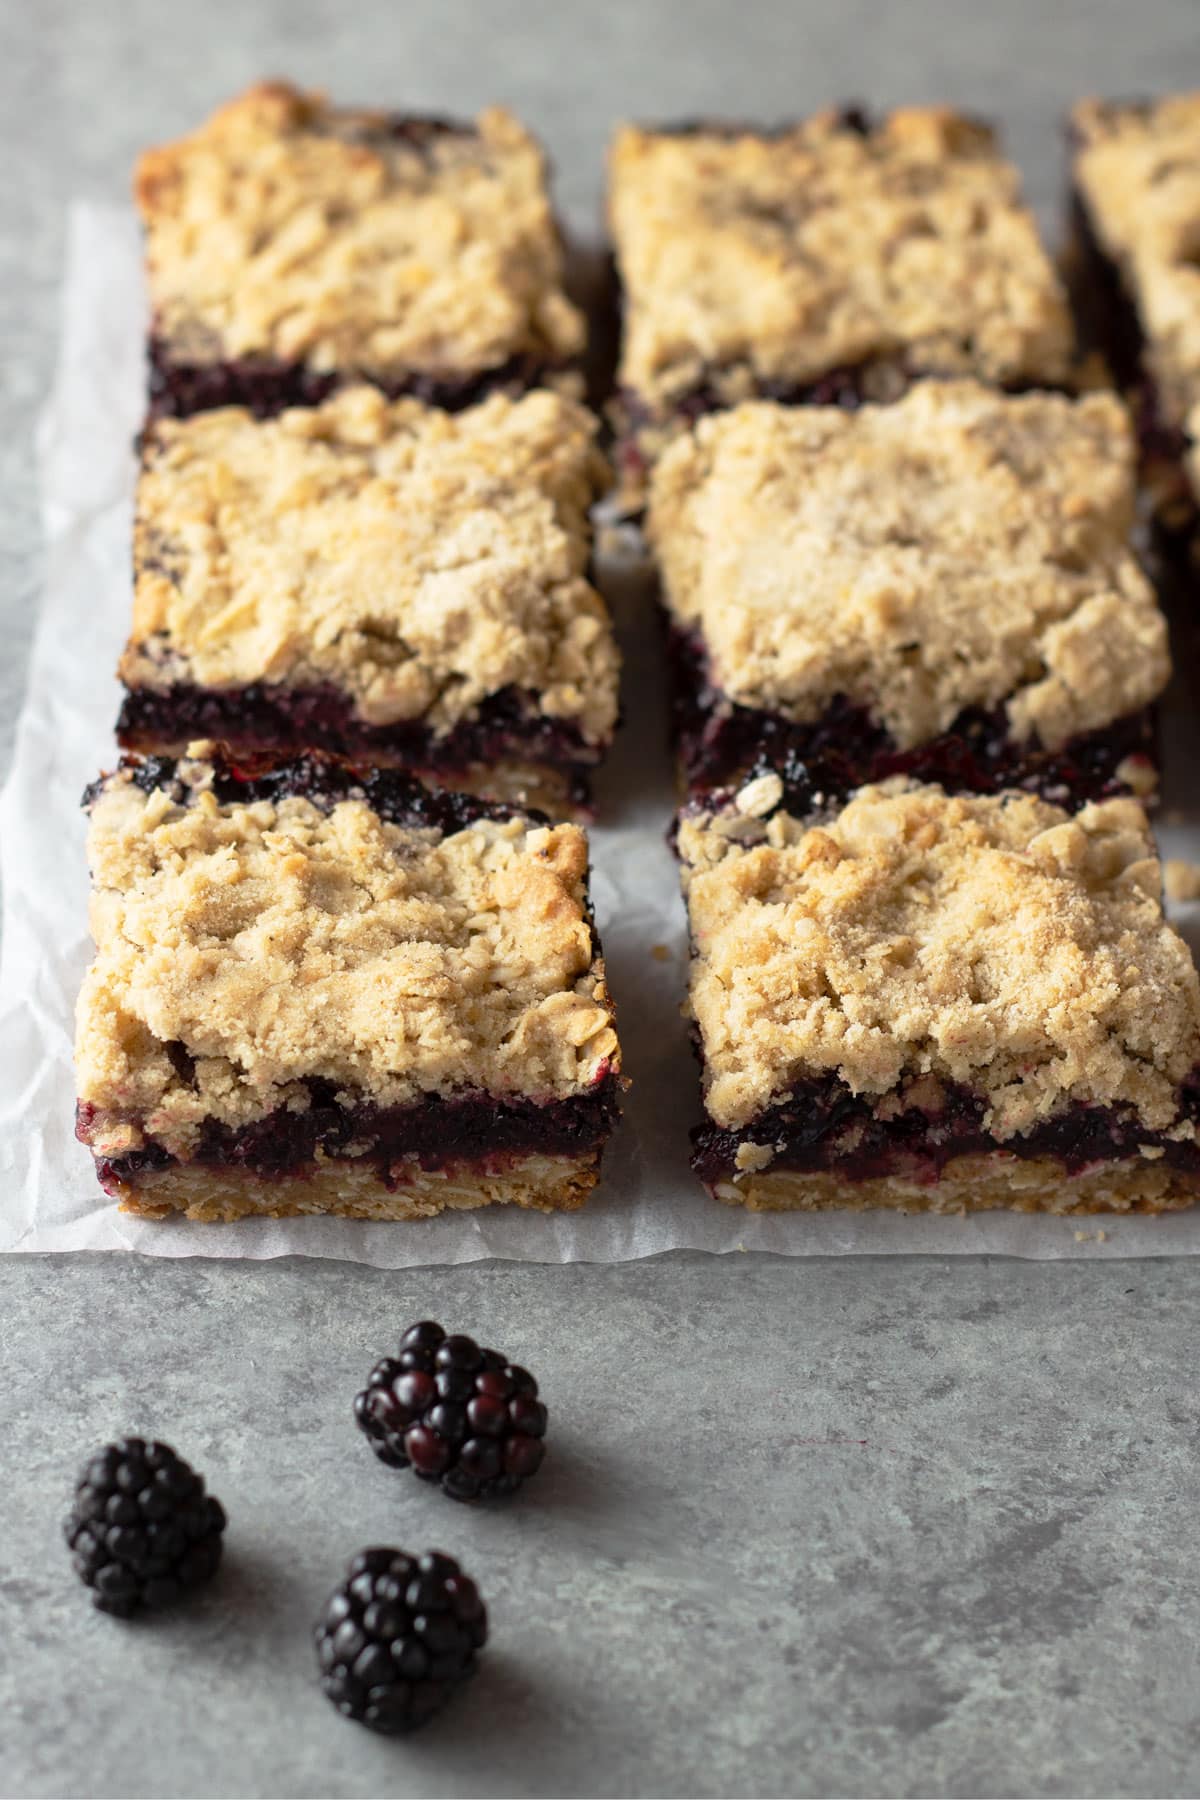 Angled view of a group of squares of blackberry bars on parchment on a grey surface.